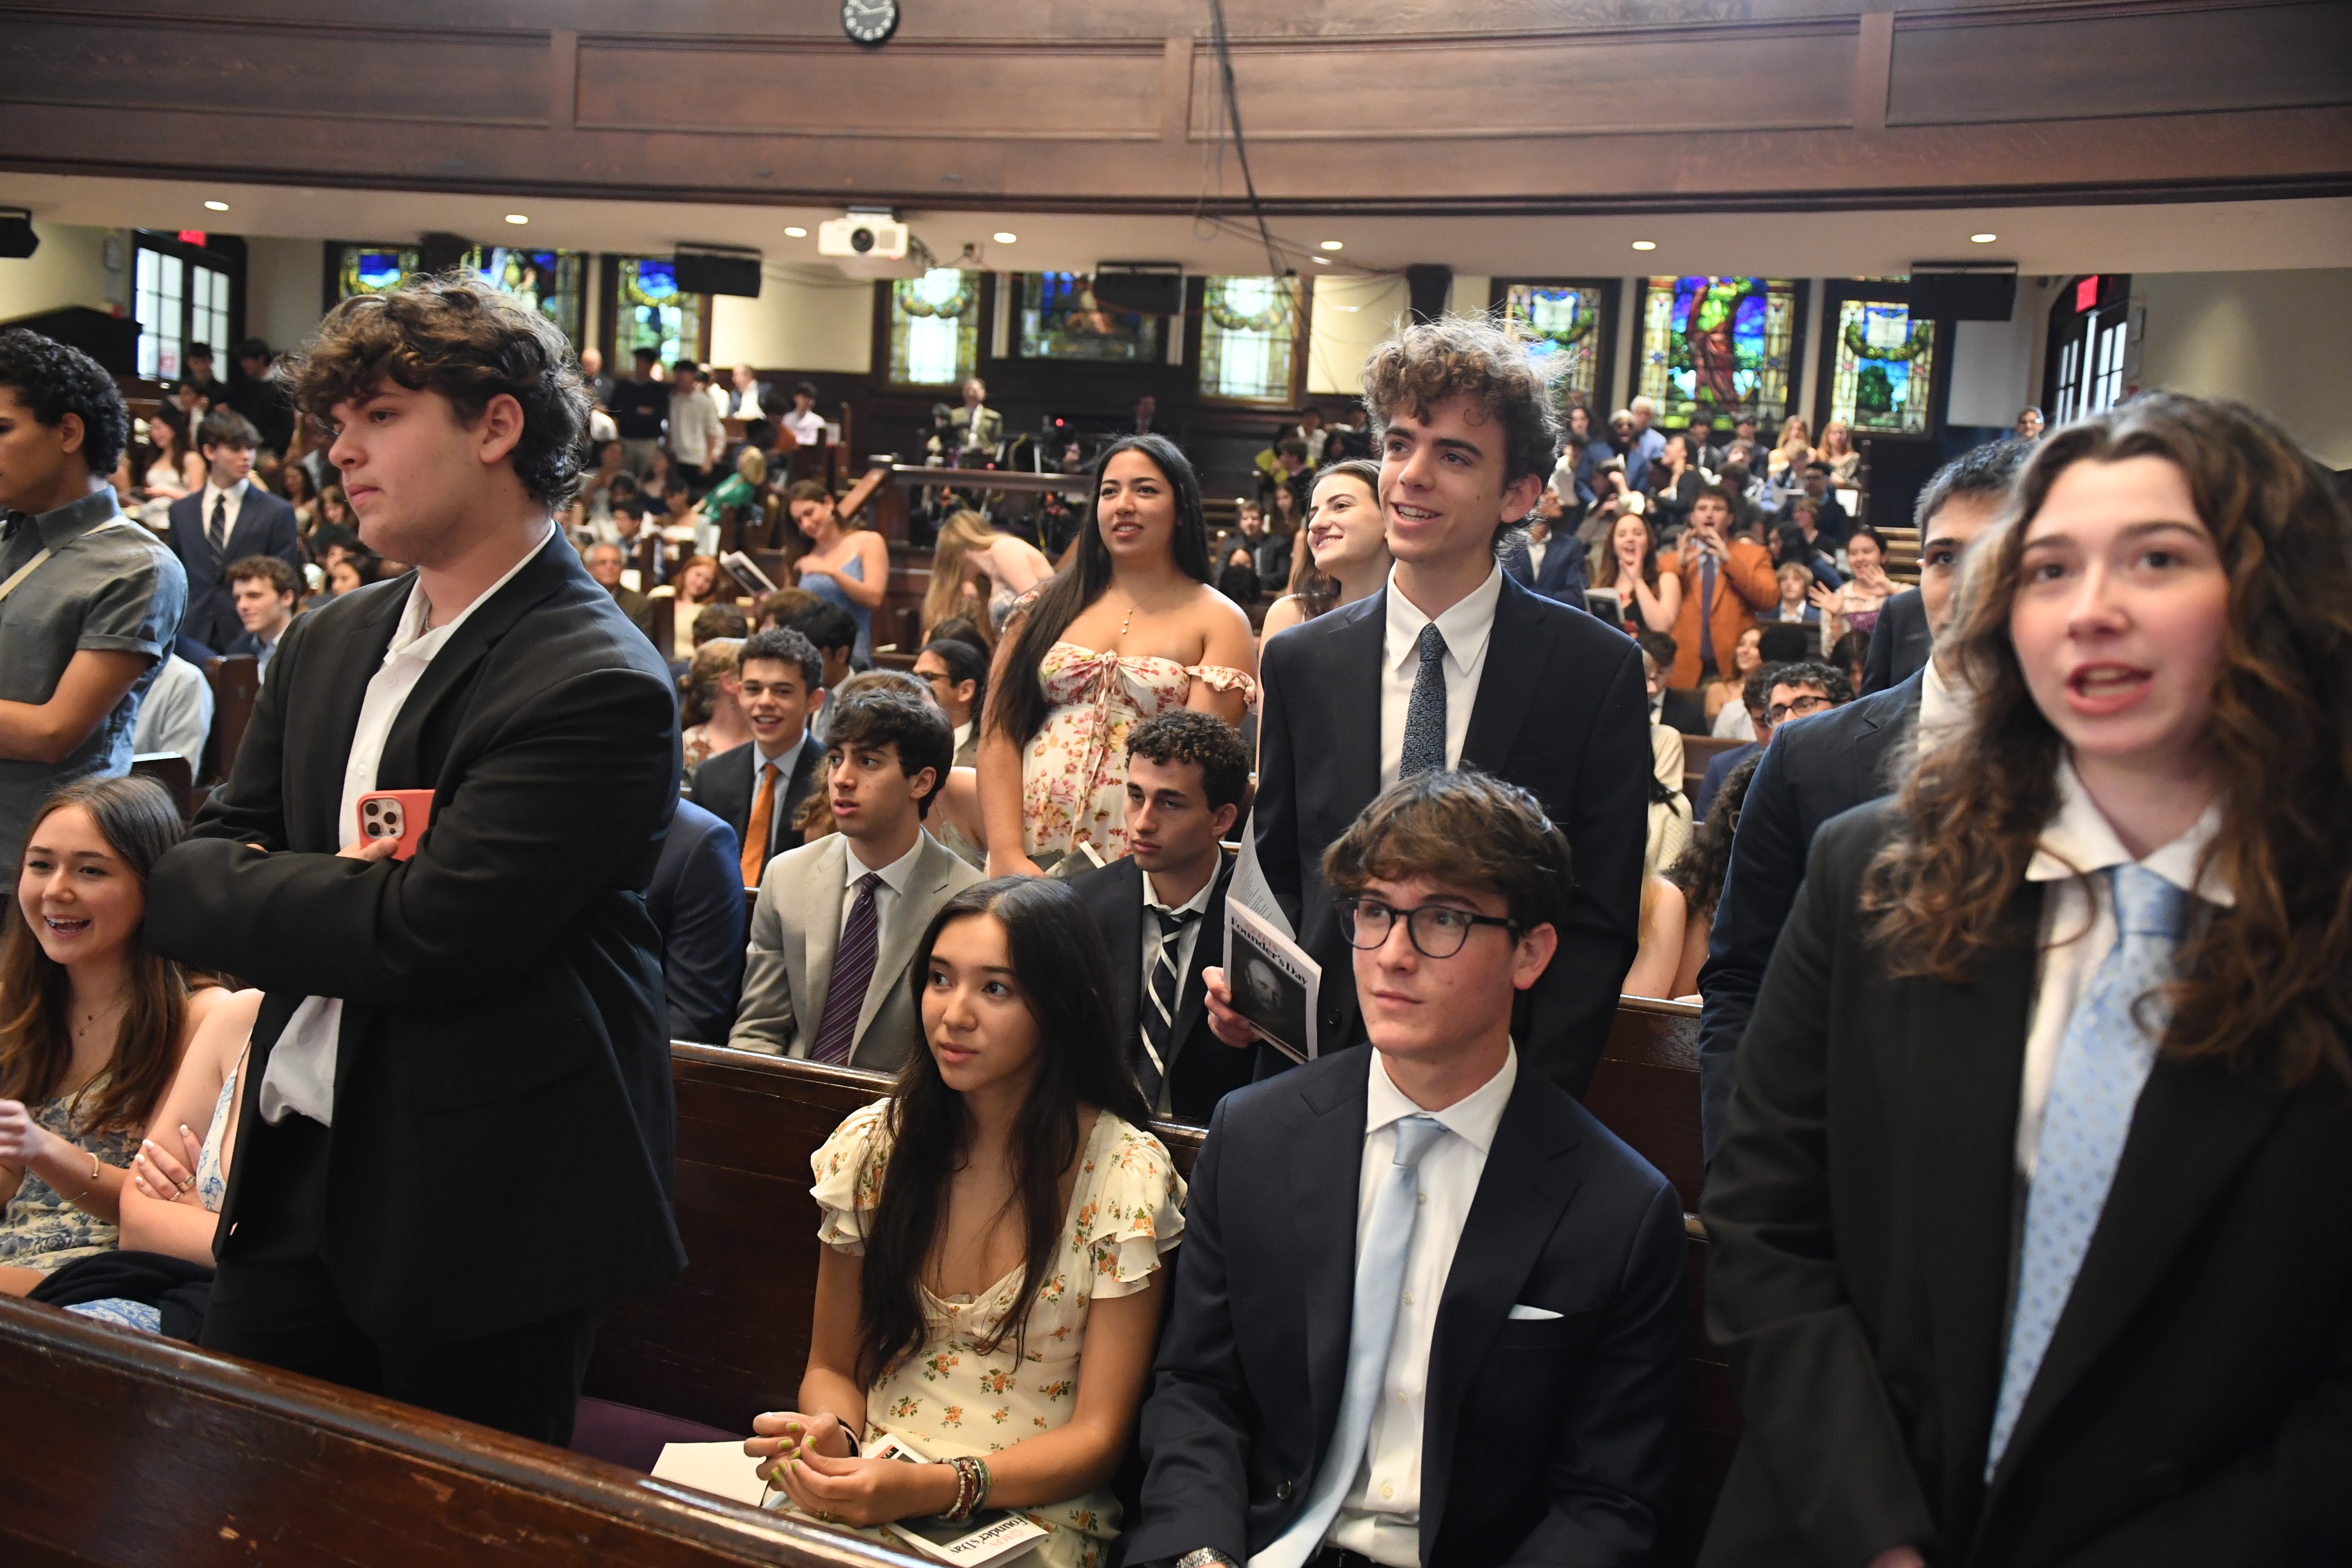 Students, some standing and some sitting, gathered in Adler Hall for Founder's Day